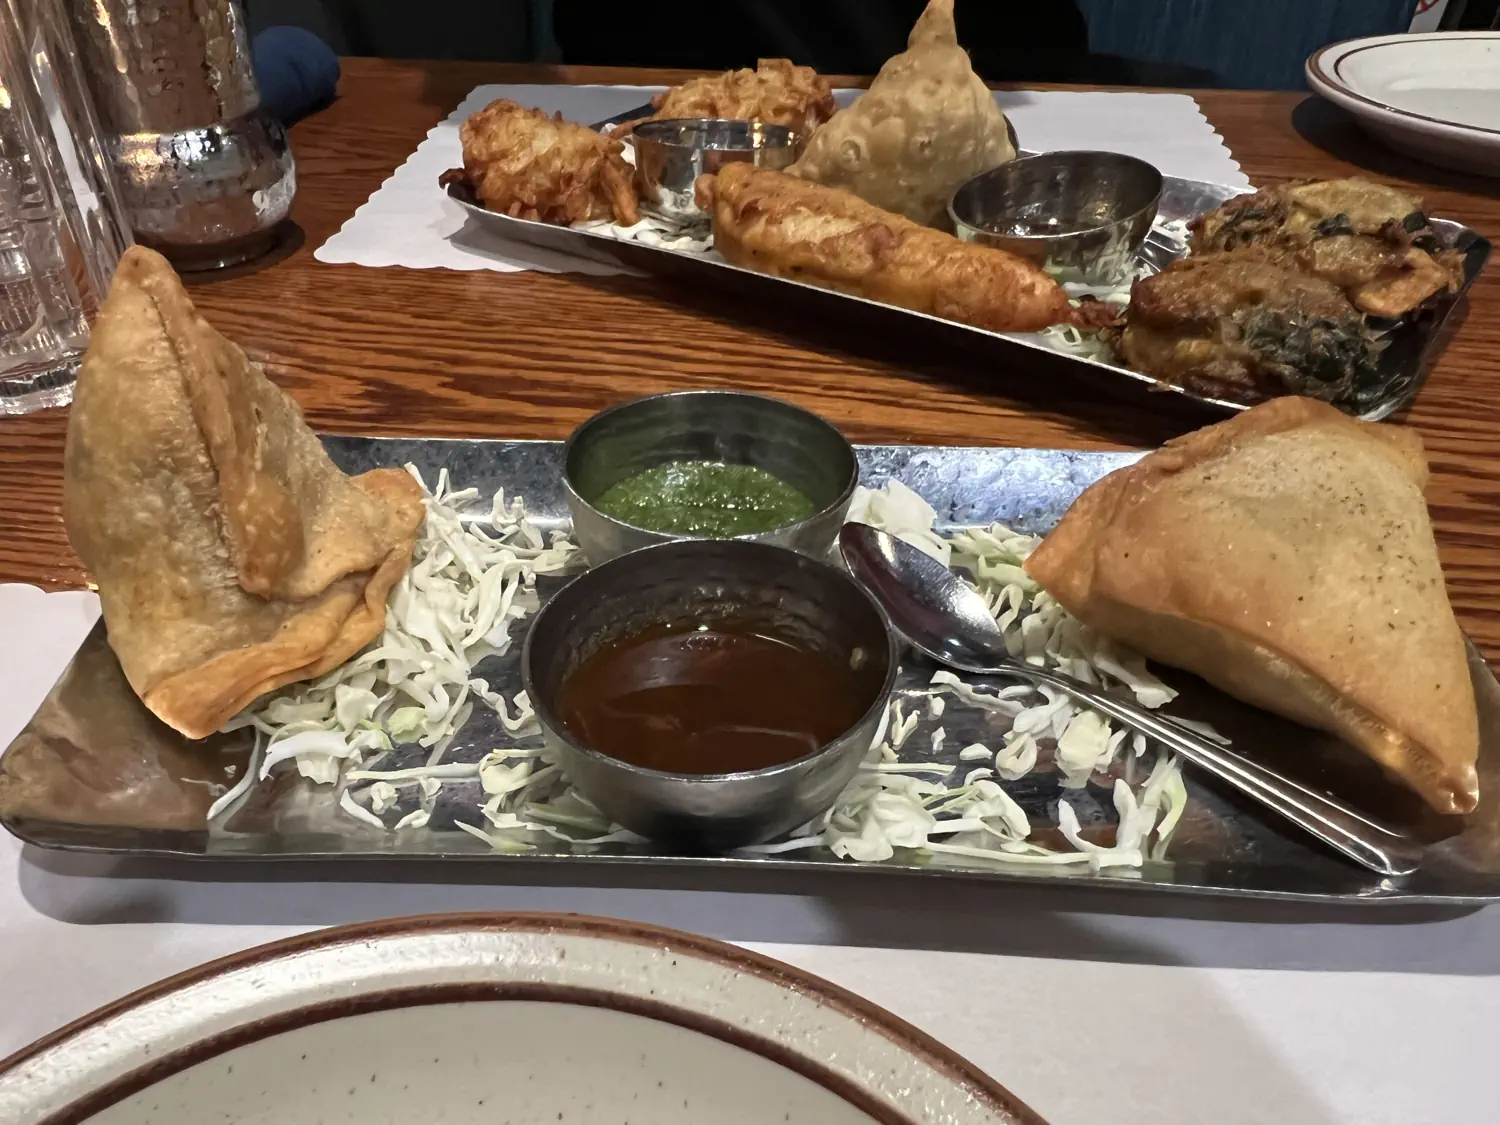 We ordered an assortment of appetizers to start our meal: Vegetable Samosas, Onion Bhaji, Chicken Pakora, and Vegetable Pakora